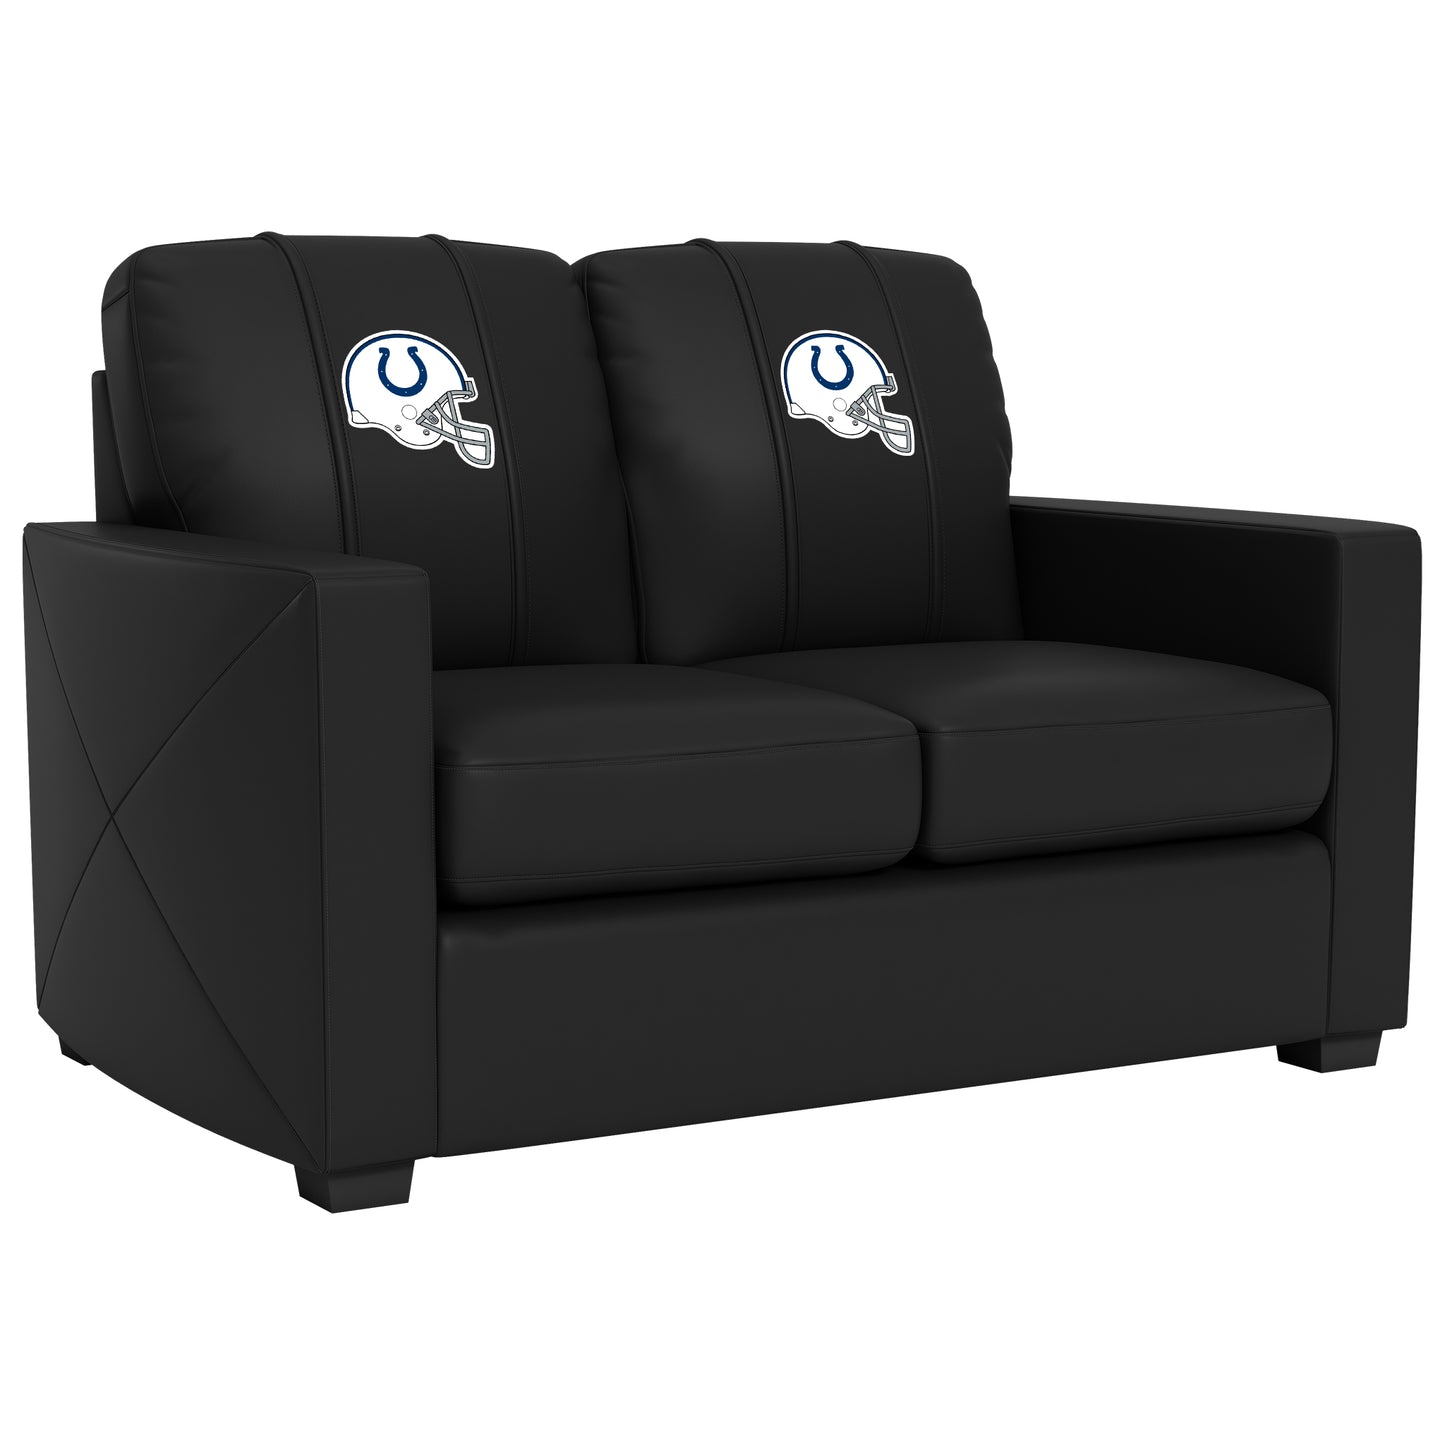 Silver Loveseat with  Indianapolis Colts Helmet Logo